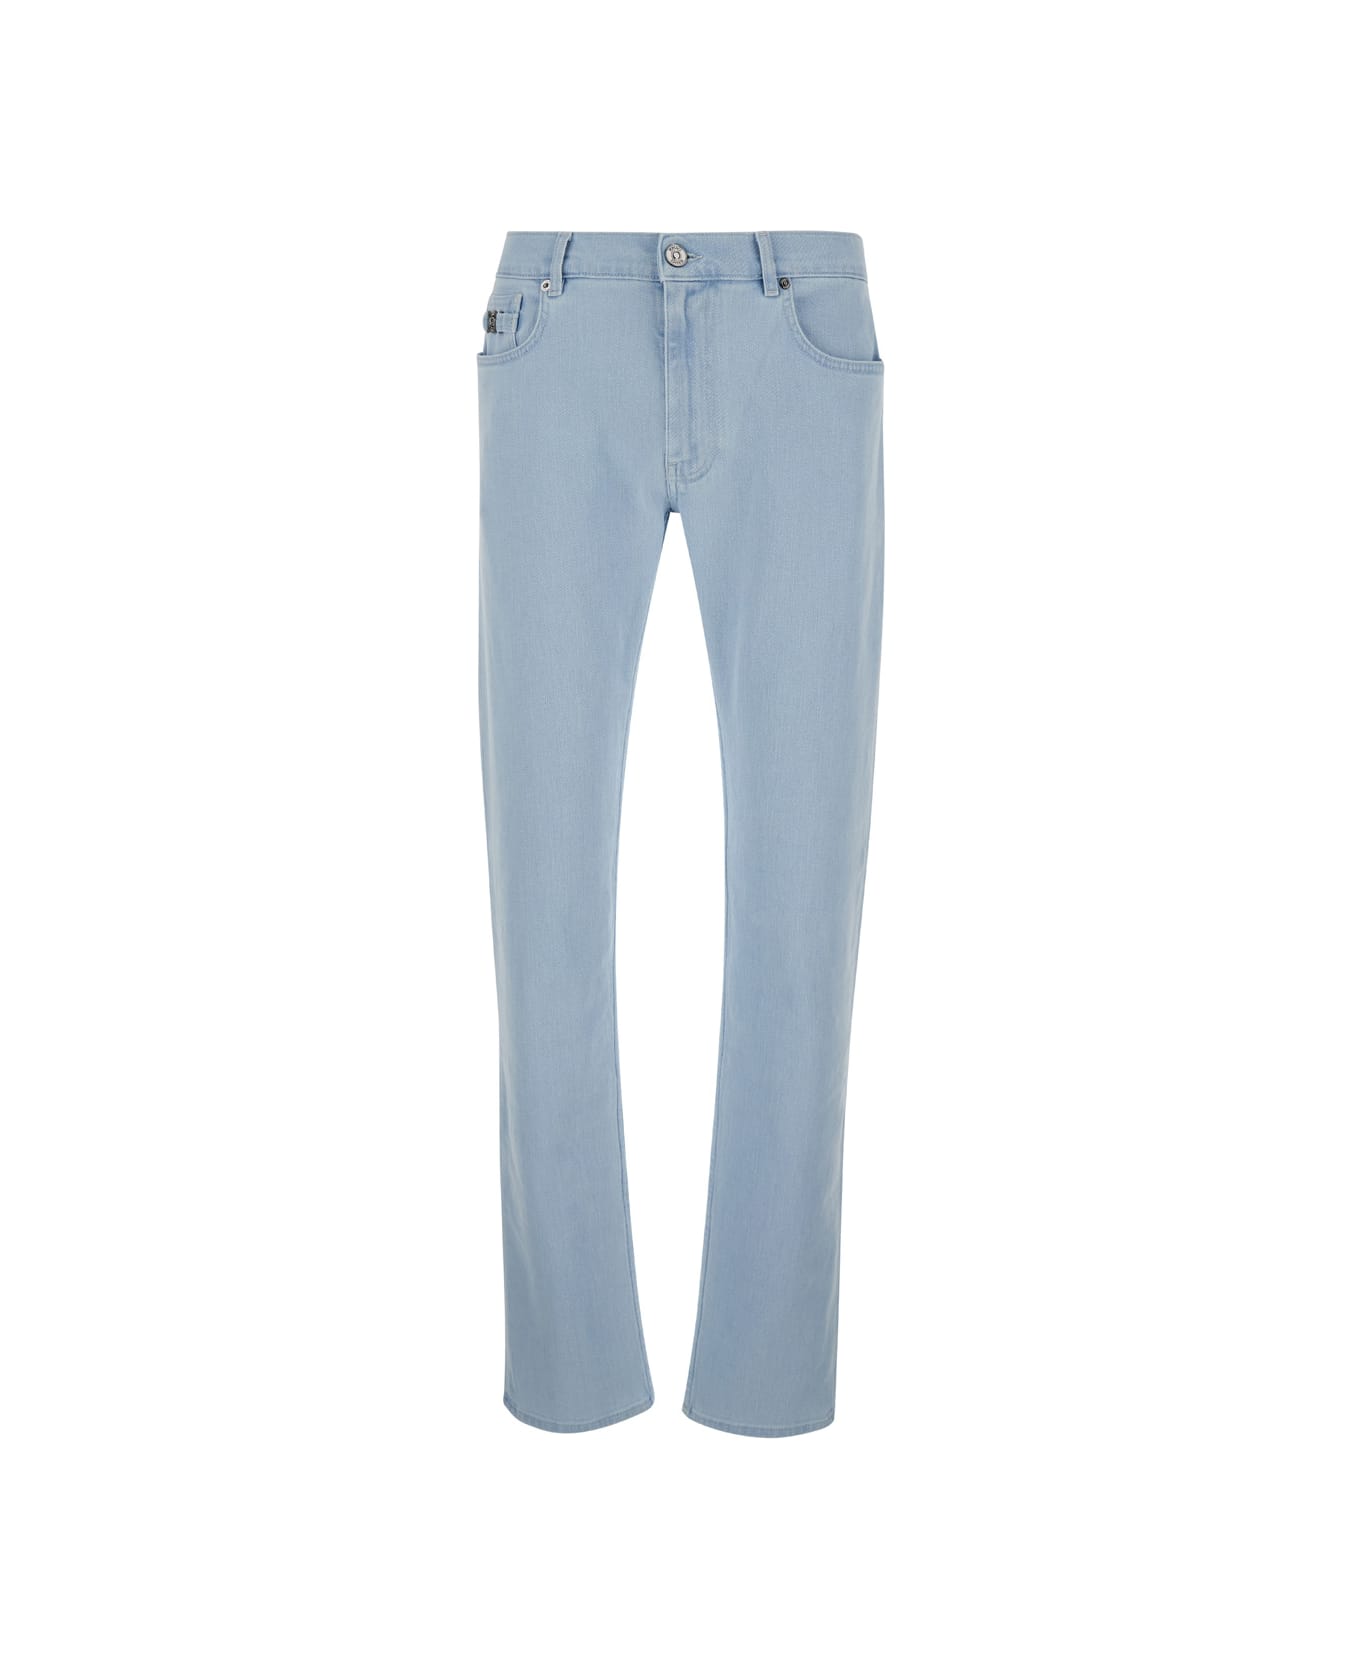 Versace Light Blue Skinny Jeans With Logo Patch In Denim Man - Light Blue Ice